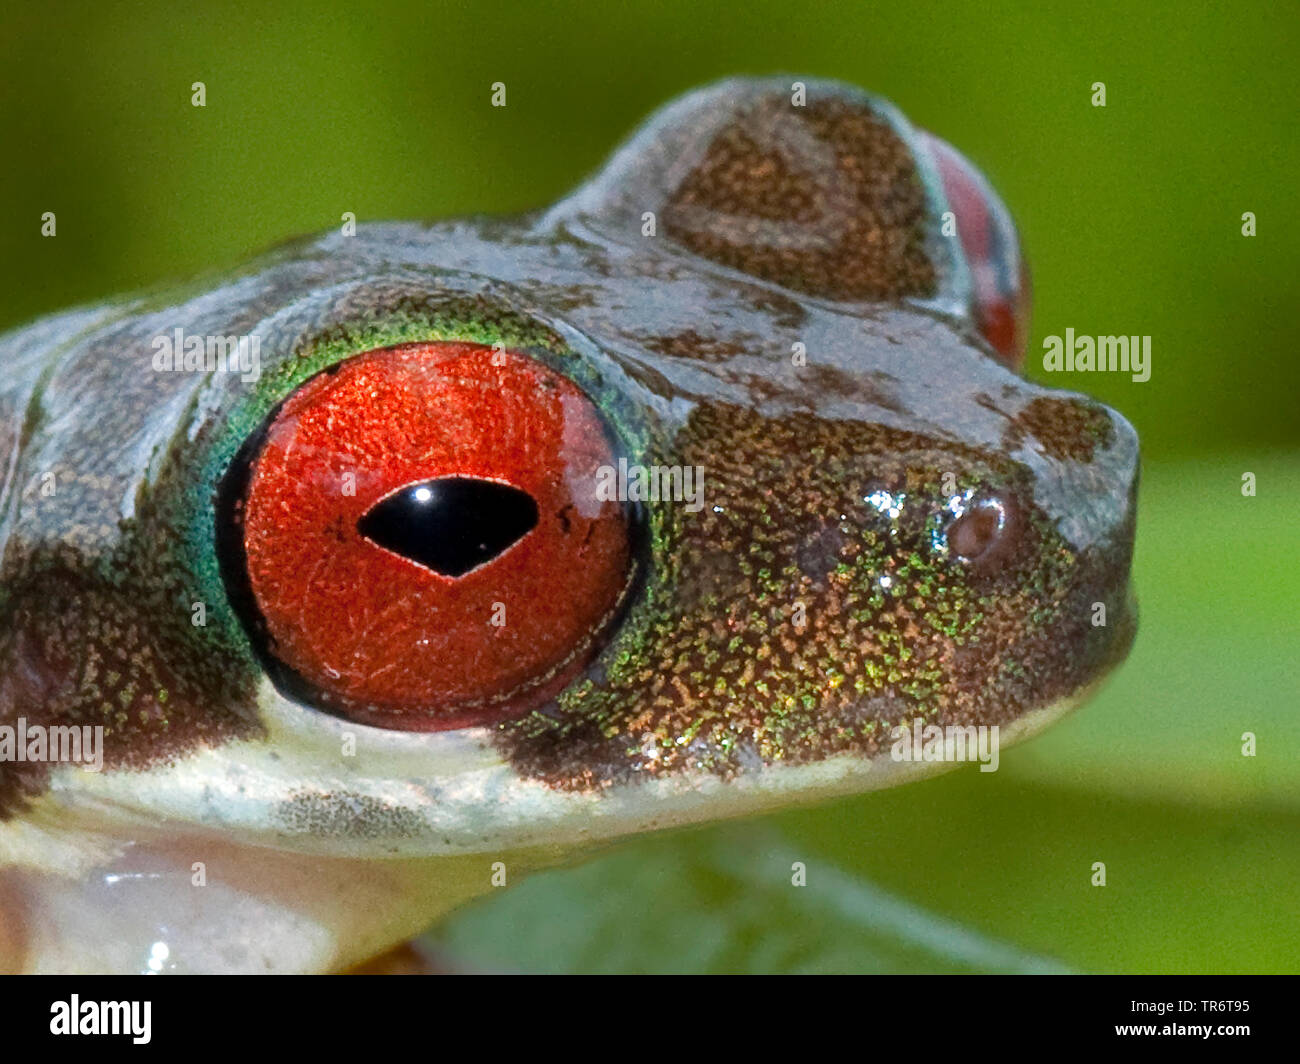 Rufous-eyed brook frog (Duellmanohyla rufioculis), Costa Rica Foto Stock